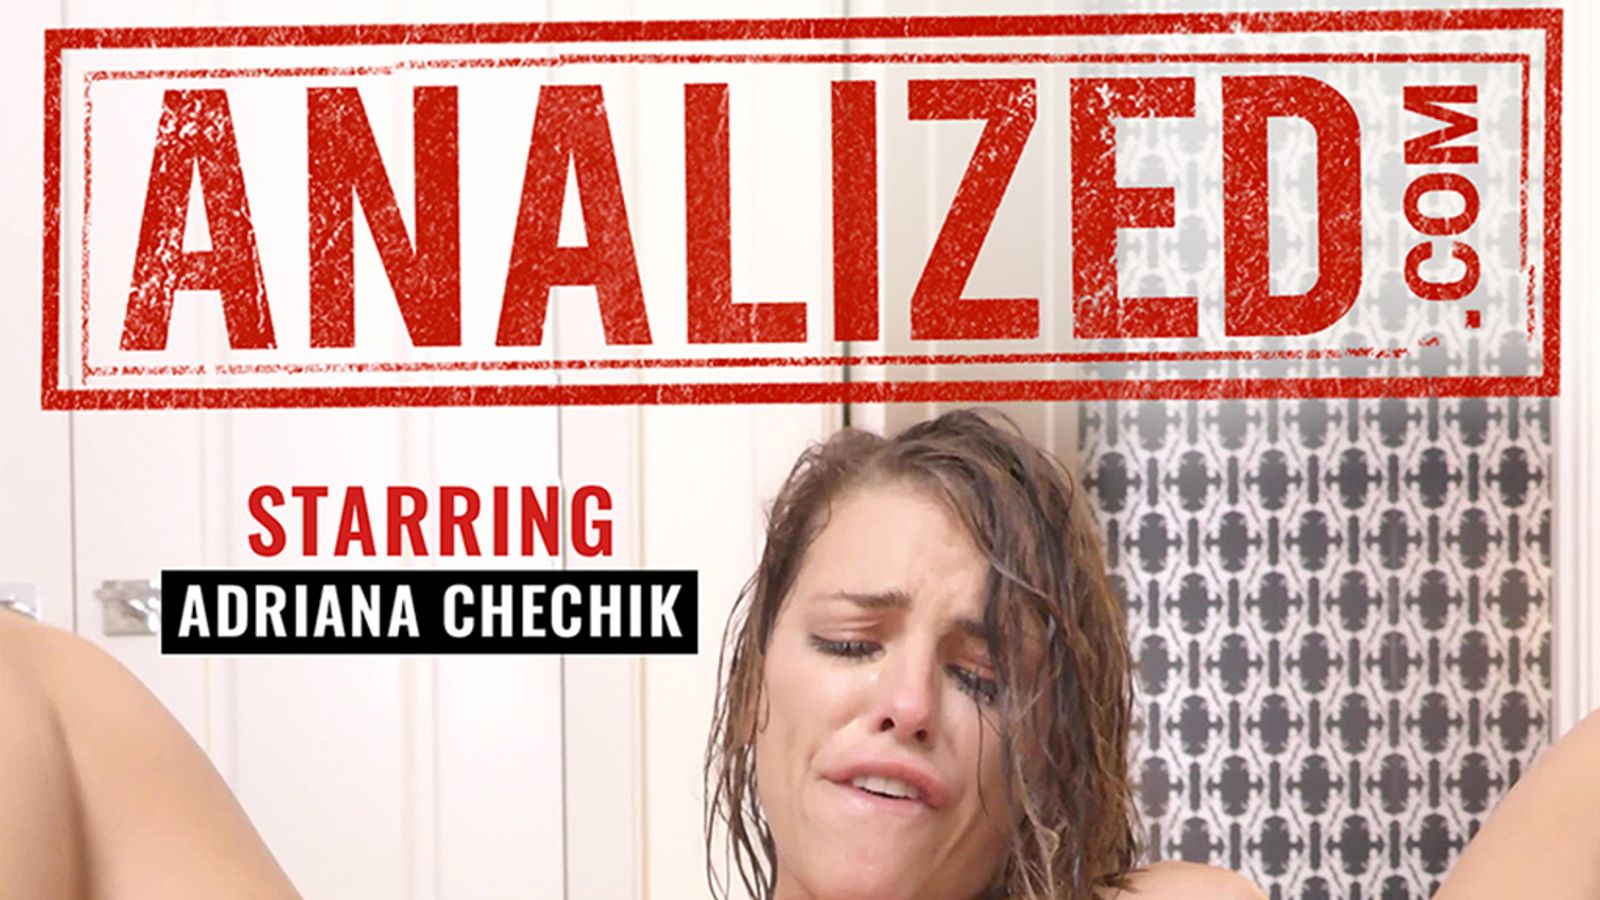 Adriana Chechik On The Box Of Analized.com's ‘Anal Destruction 3’